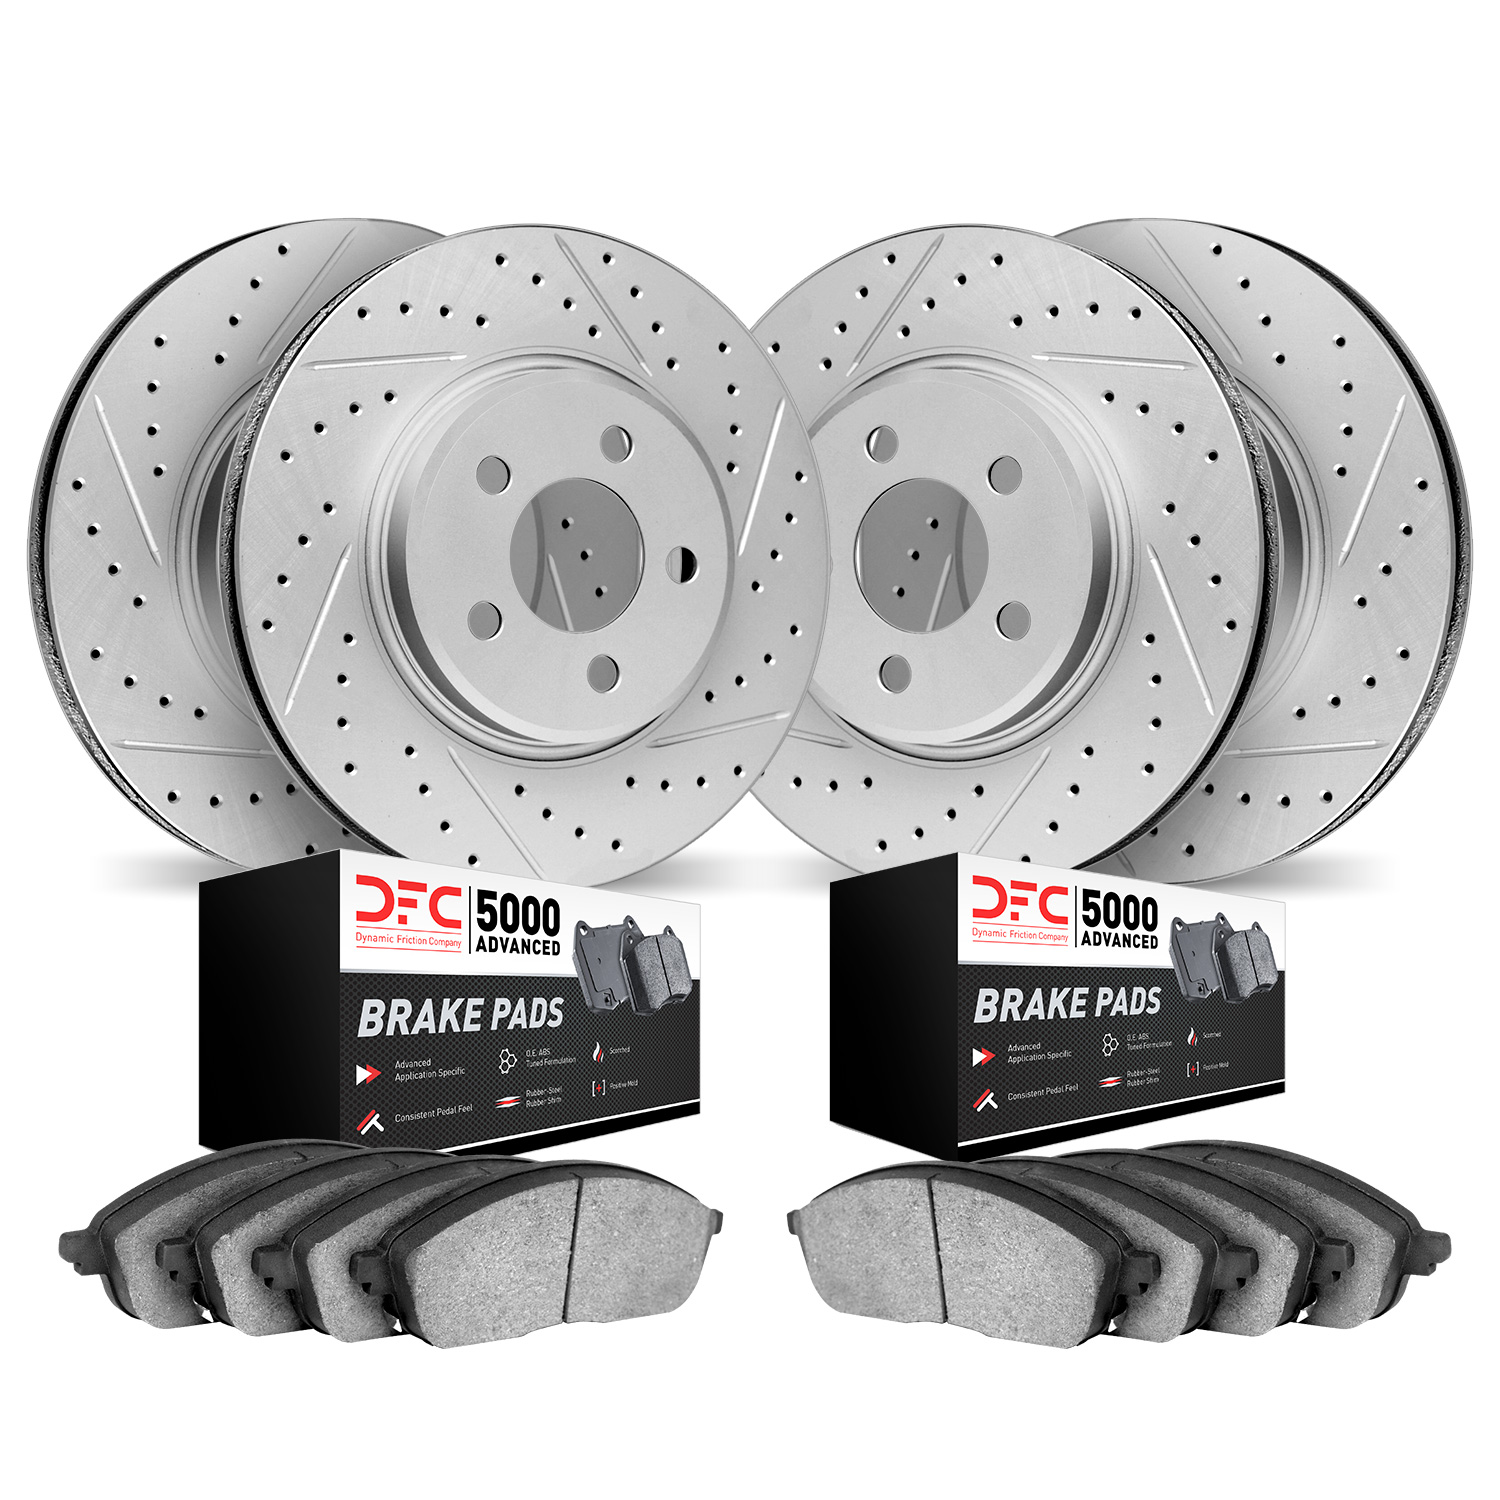 2504-31050 Geoperformance Drilled/Slotted Rotors w/5000 Advanced Brake Pads Kit, 2002-2006 BMW, Position: Front and Rear